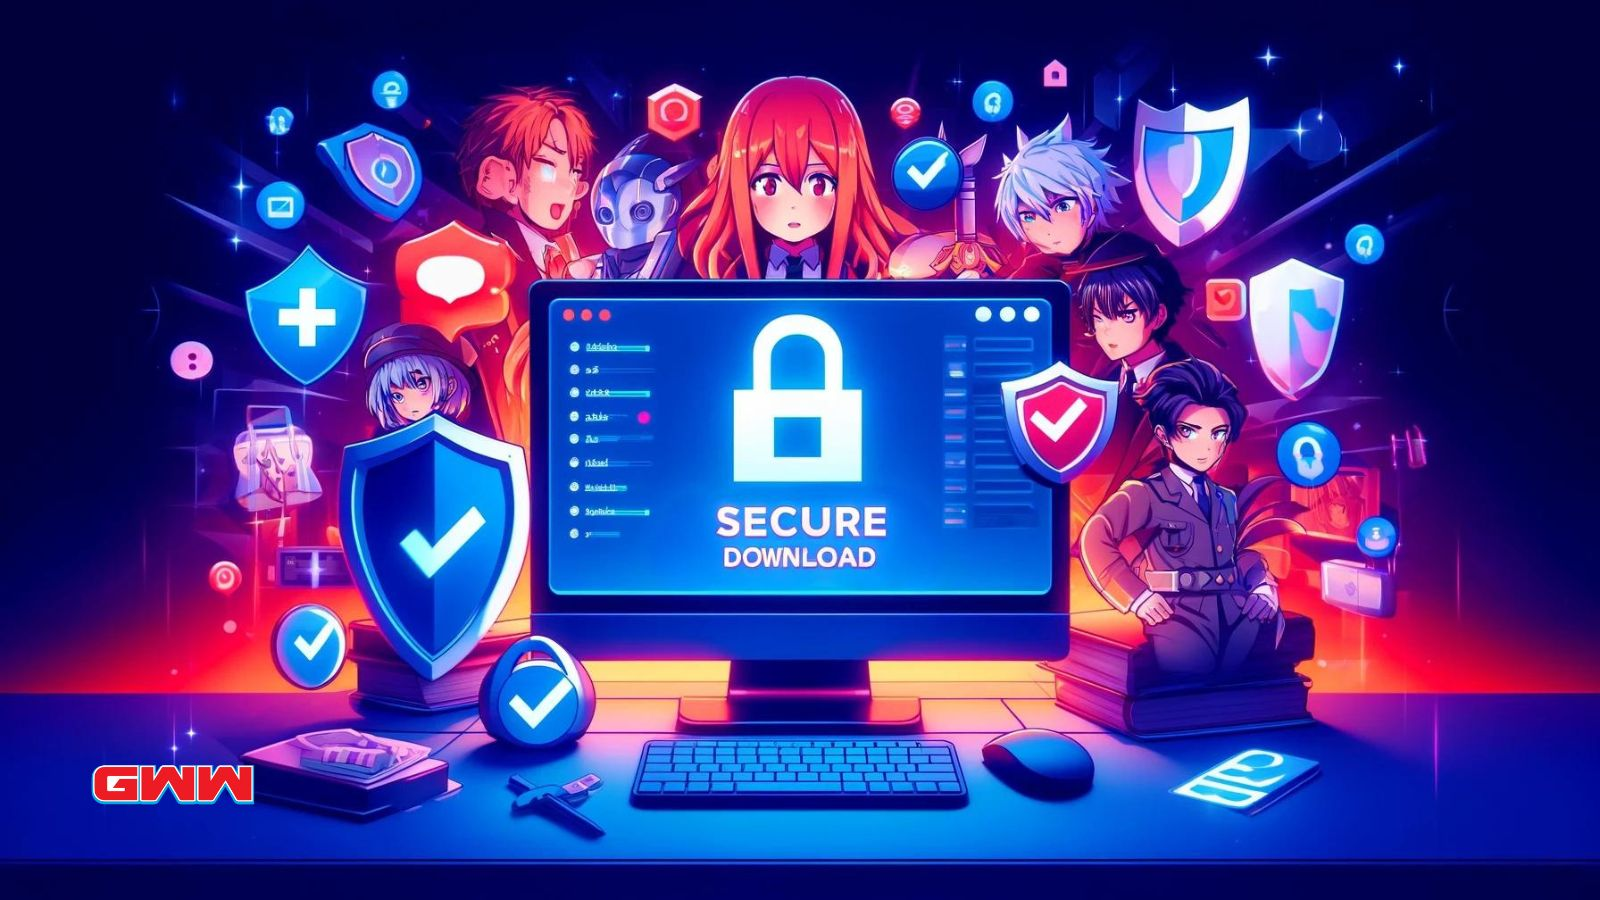  A vivid and engaging widescreen image exploring the safety of 9anime downloads.